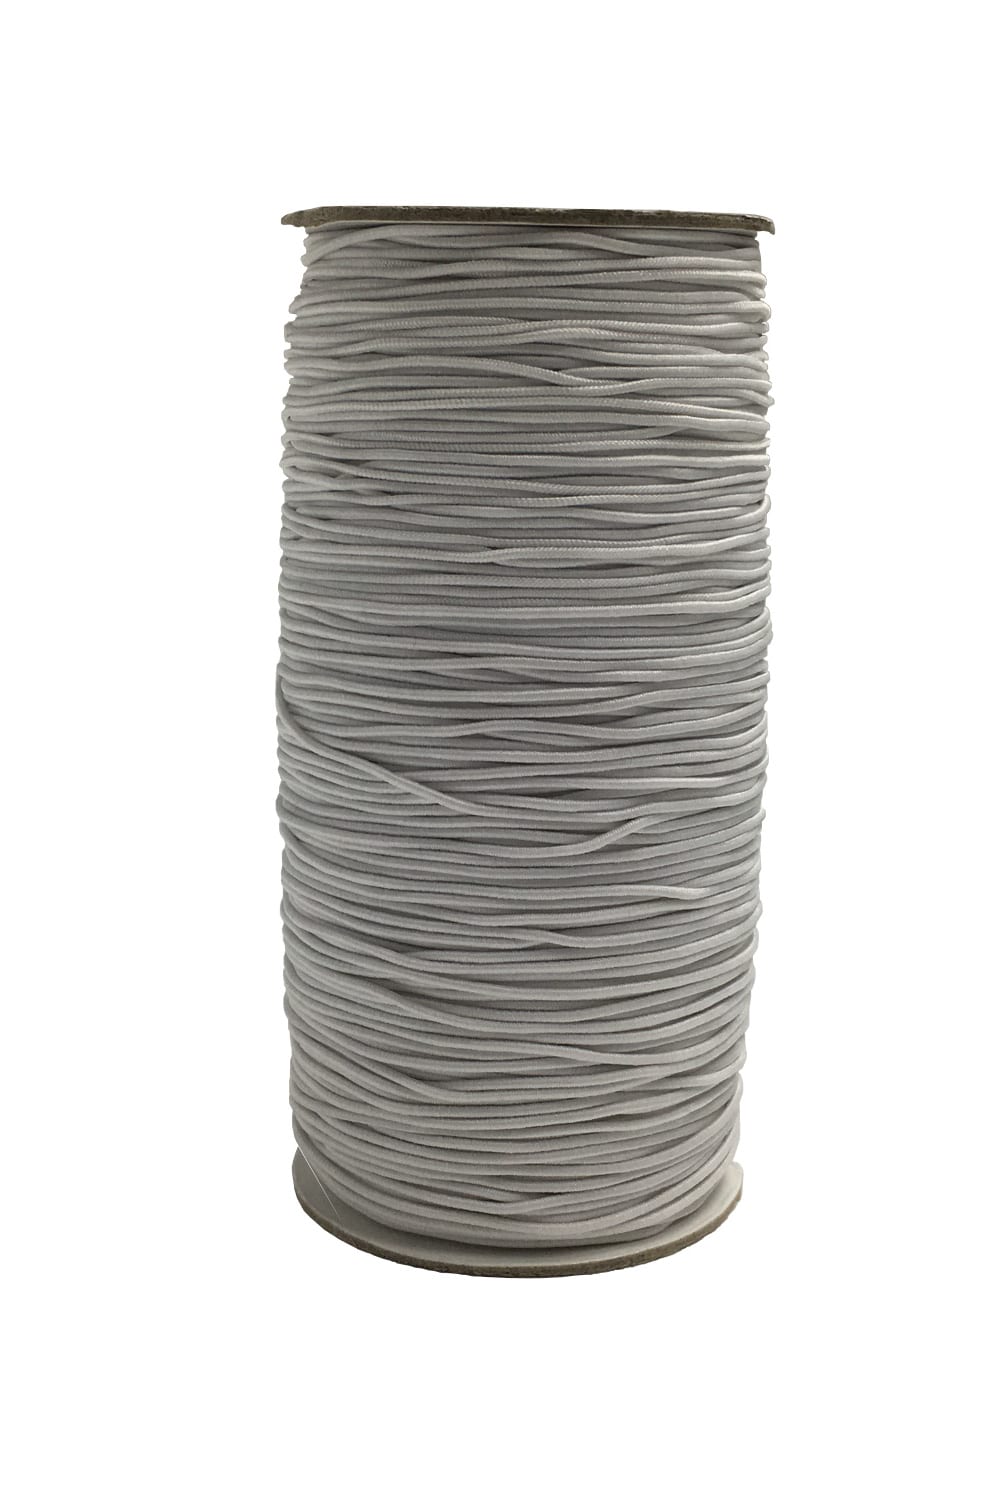 1 cord Round Hat Elastic White SC13 - 1.5mm x 200mtr roll